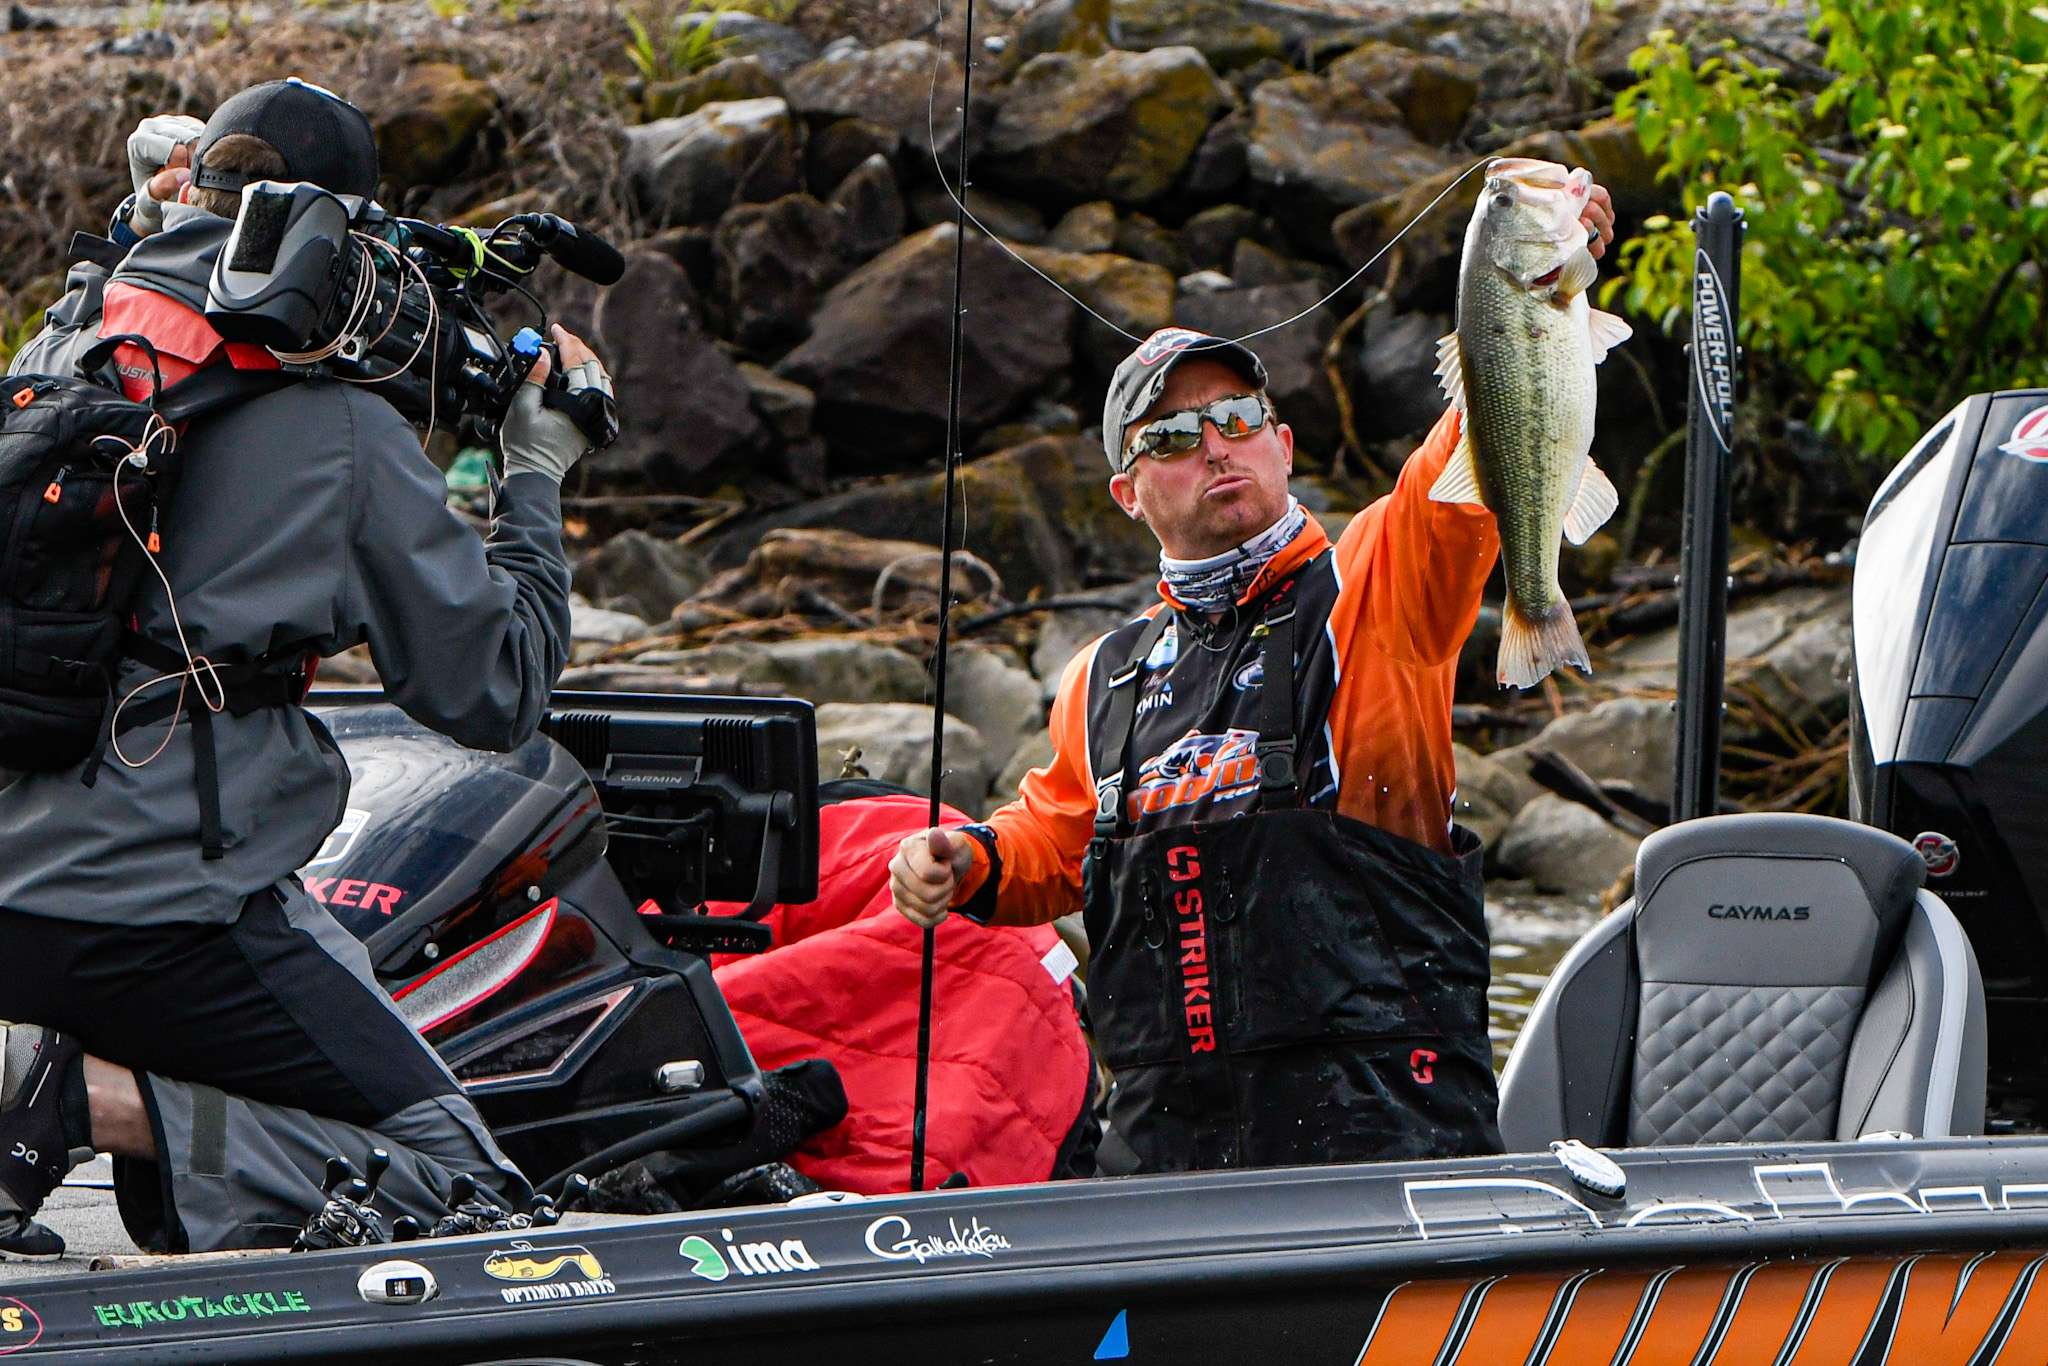 Paul Mueller was in the hunt all week. With two bags of 15-3, the two-time Elite champion held the lead heading into Day 3. He trailed the leader by 1-2 entering Championship Monday, but he caught only 13-13 to finish second. There was some consolation that his 6-6 took Phoenix Boats Big Bass honors and its $1,000 bonus.